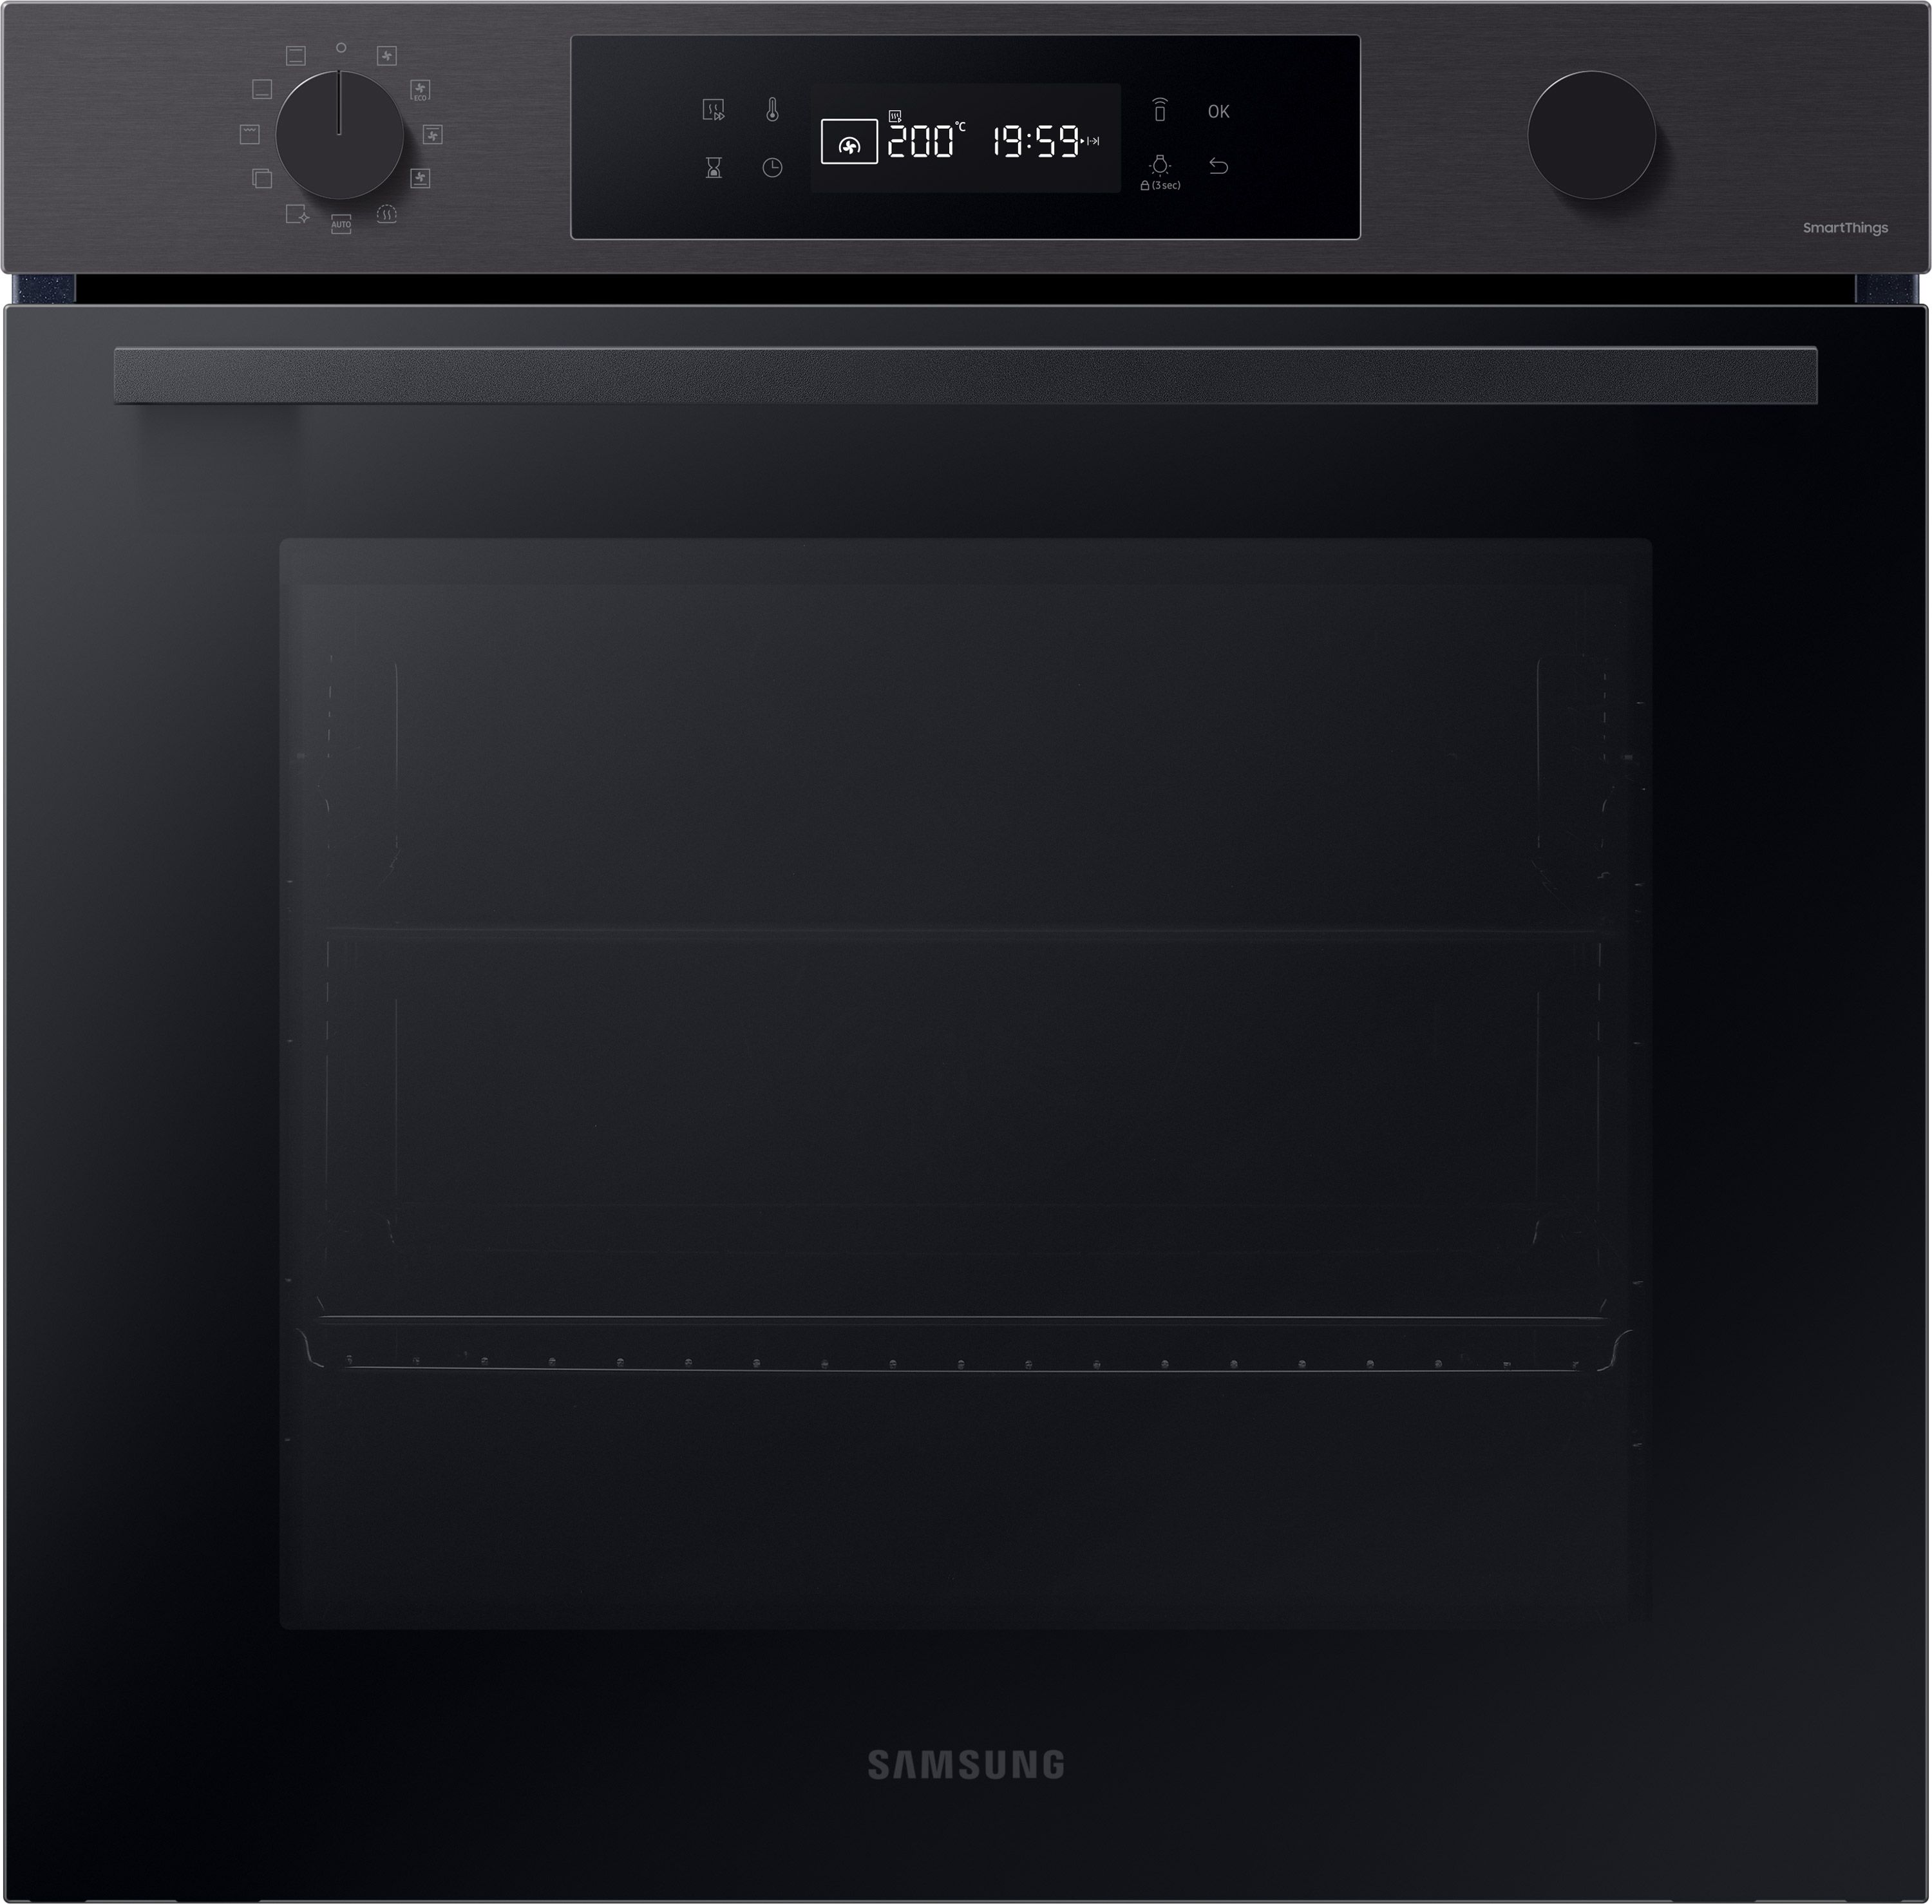 Samsung Series 4 NV7B41207AB Wifi Connected Built In Electric Single Oven - Black / Stainless Steel - A+ Rated, Black